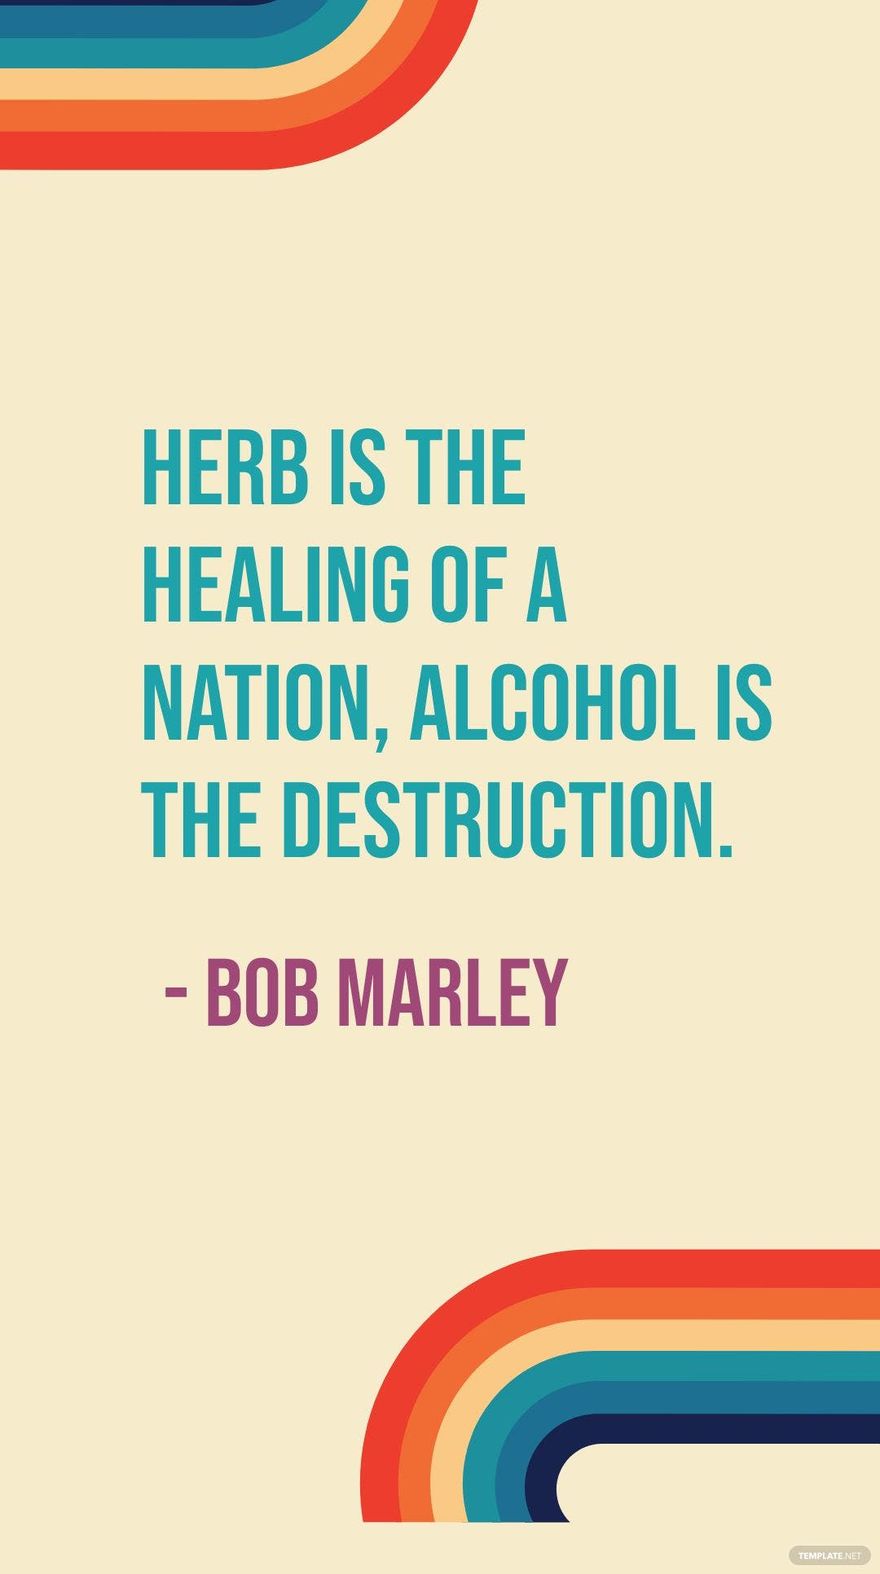 Free Bob Marley - Herb is the healing of a nation, alcohol is the destruction. in JPG